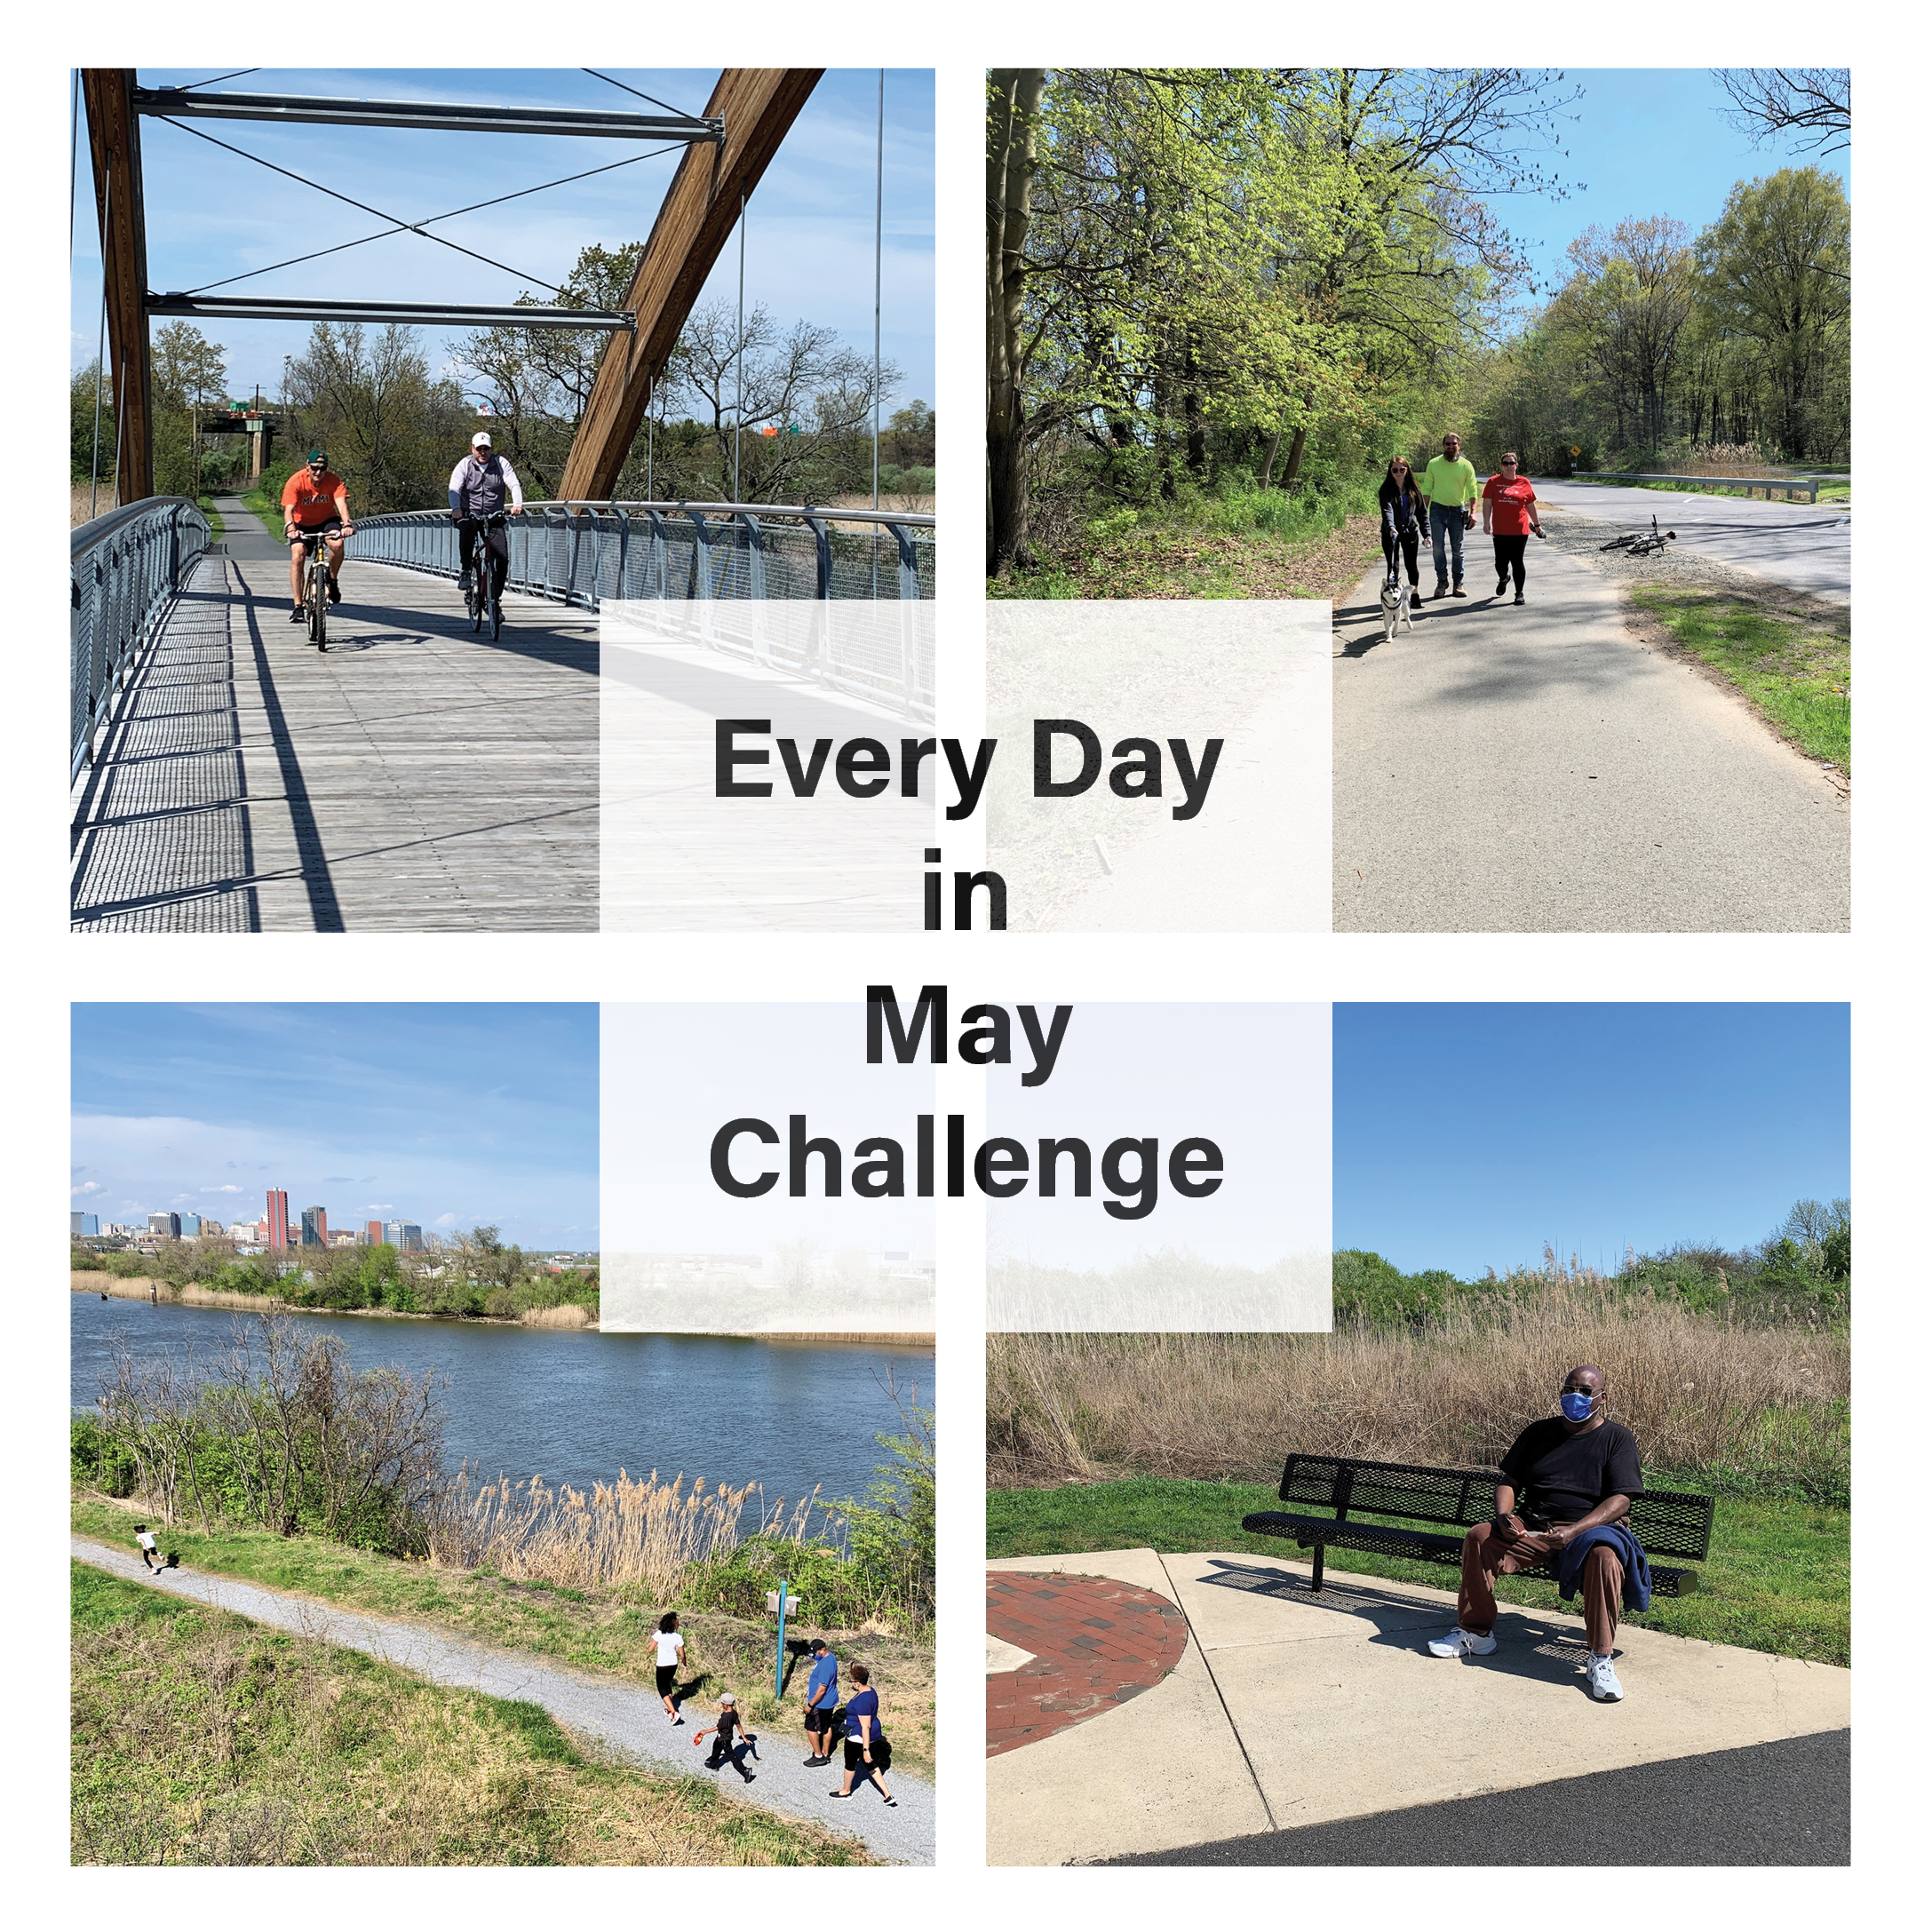 Every Day in May Challenge